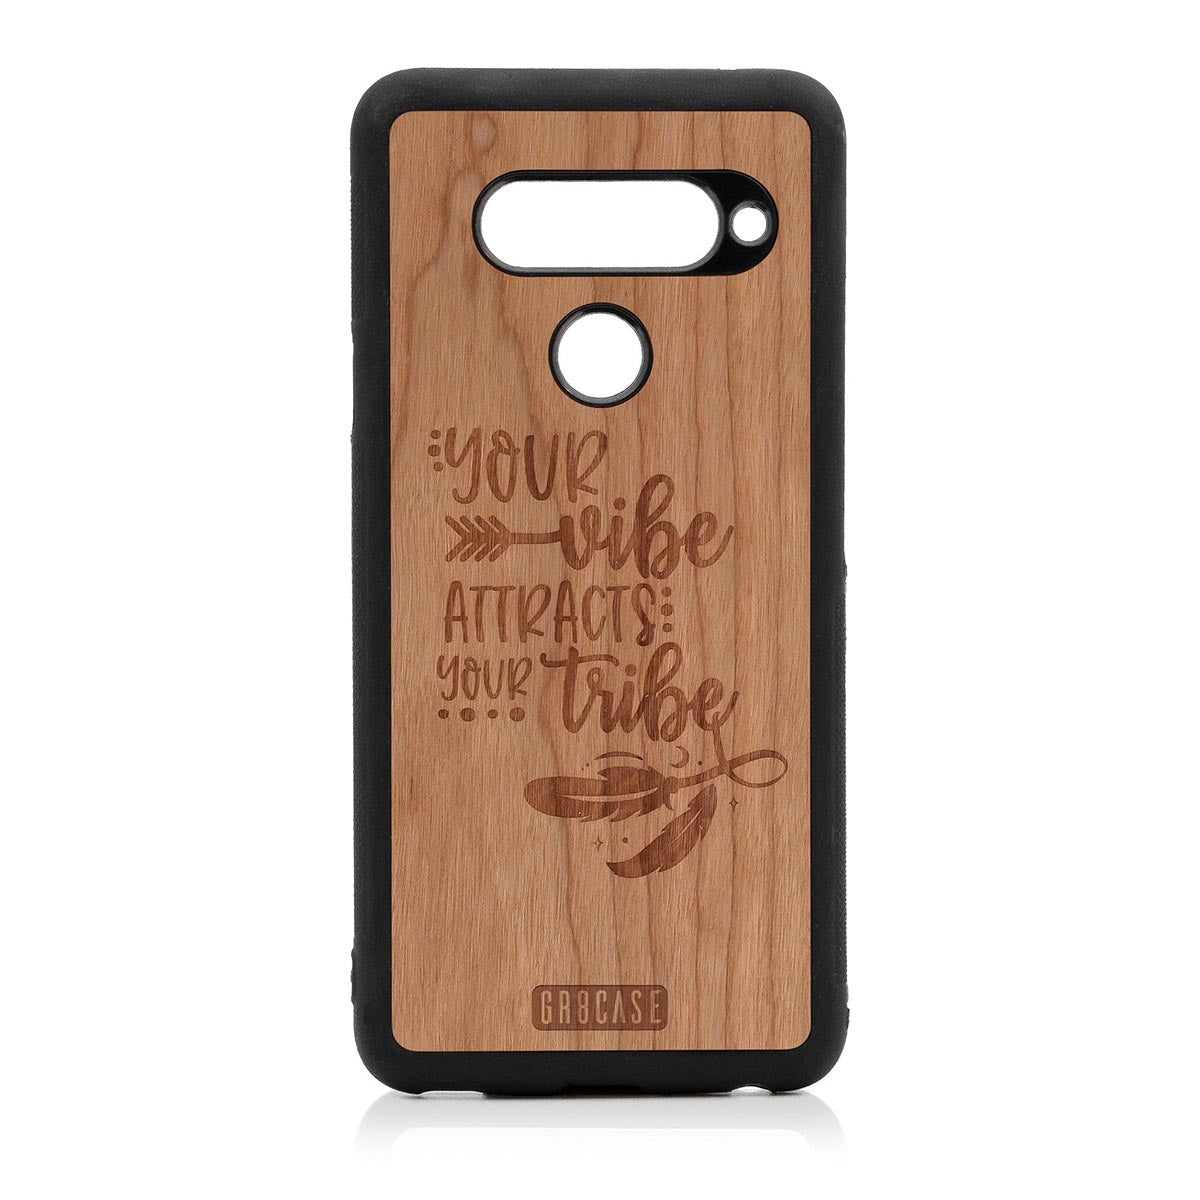 Your Vibe Attracts Your Tribe Design Wood Case LG V40